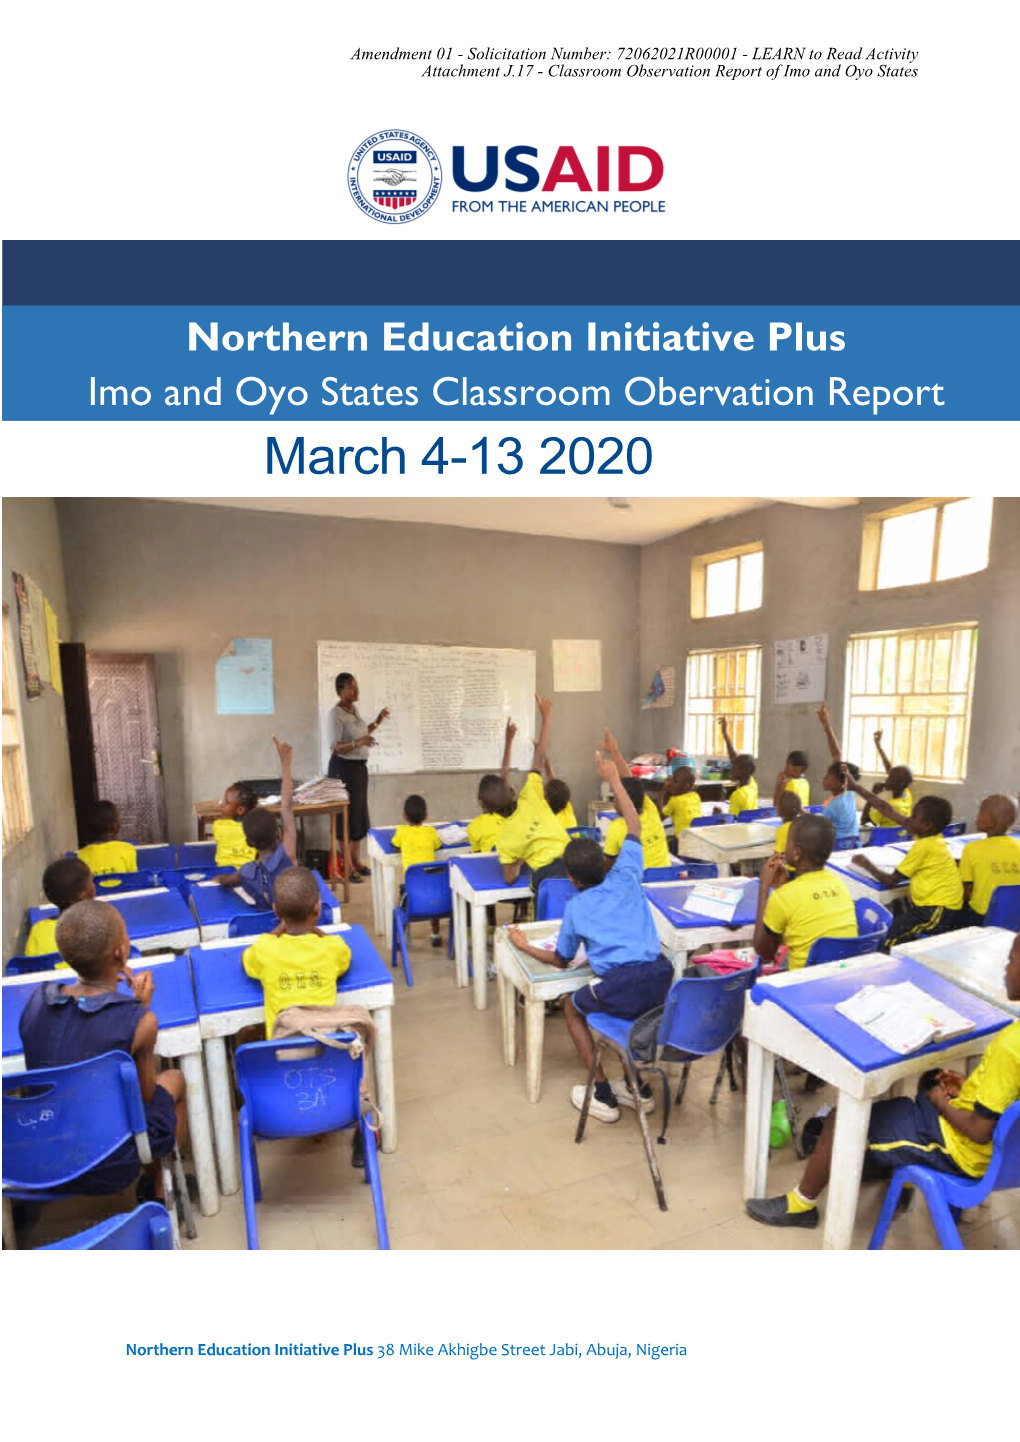 Northern Education Initiative Plus Imo and Oyo States Classroom Obervation Report March 4-13 2020